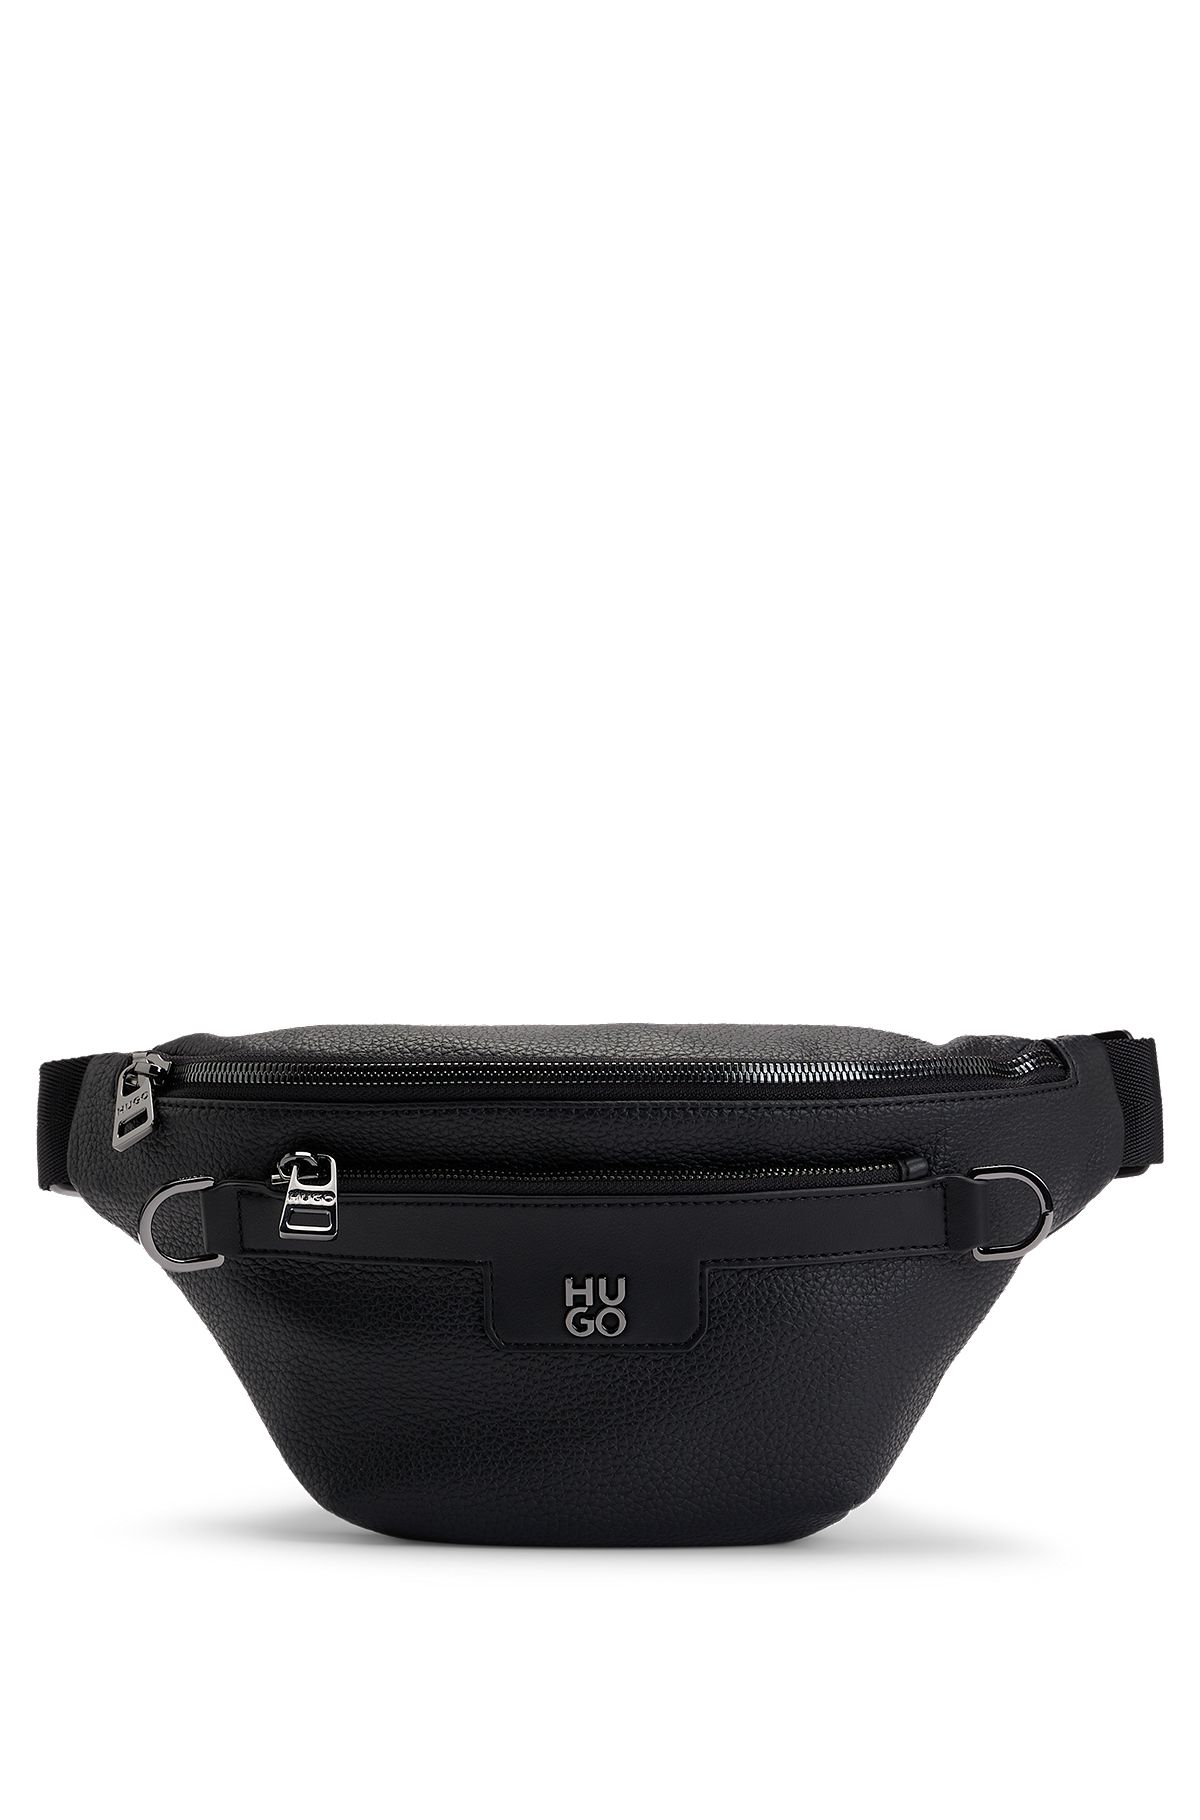 Belt bag in faux leather with metallic stacked logo, Black